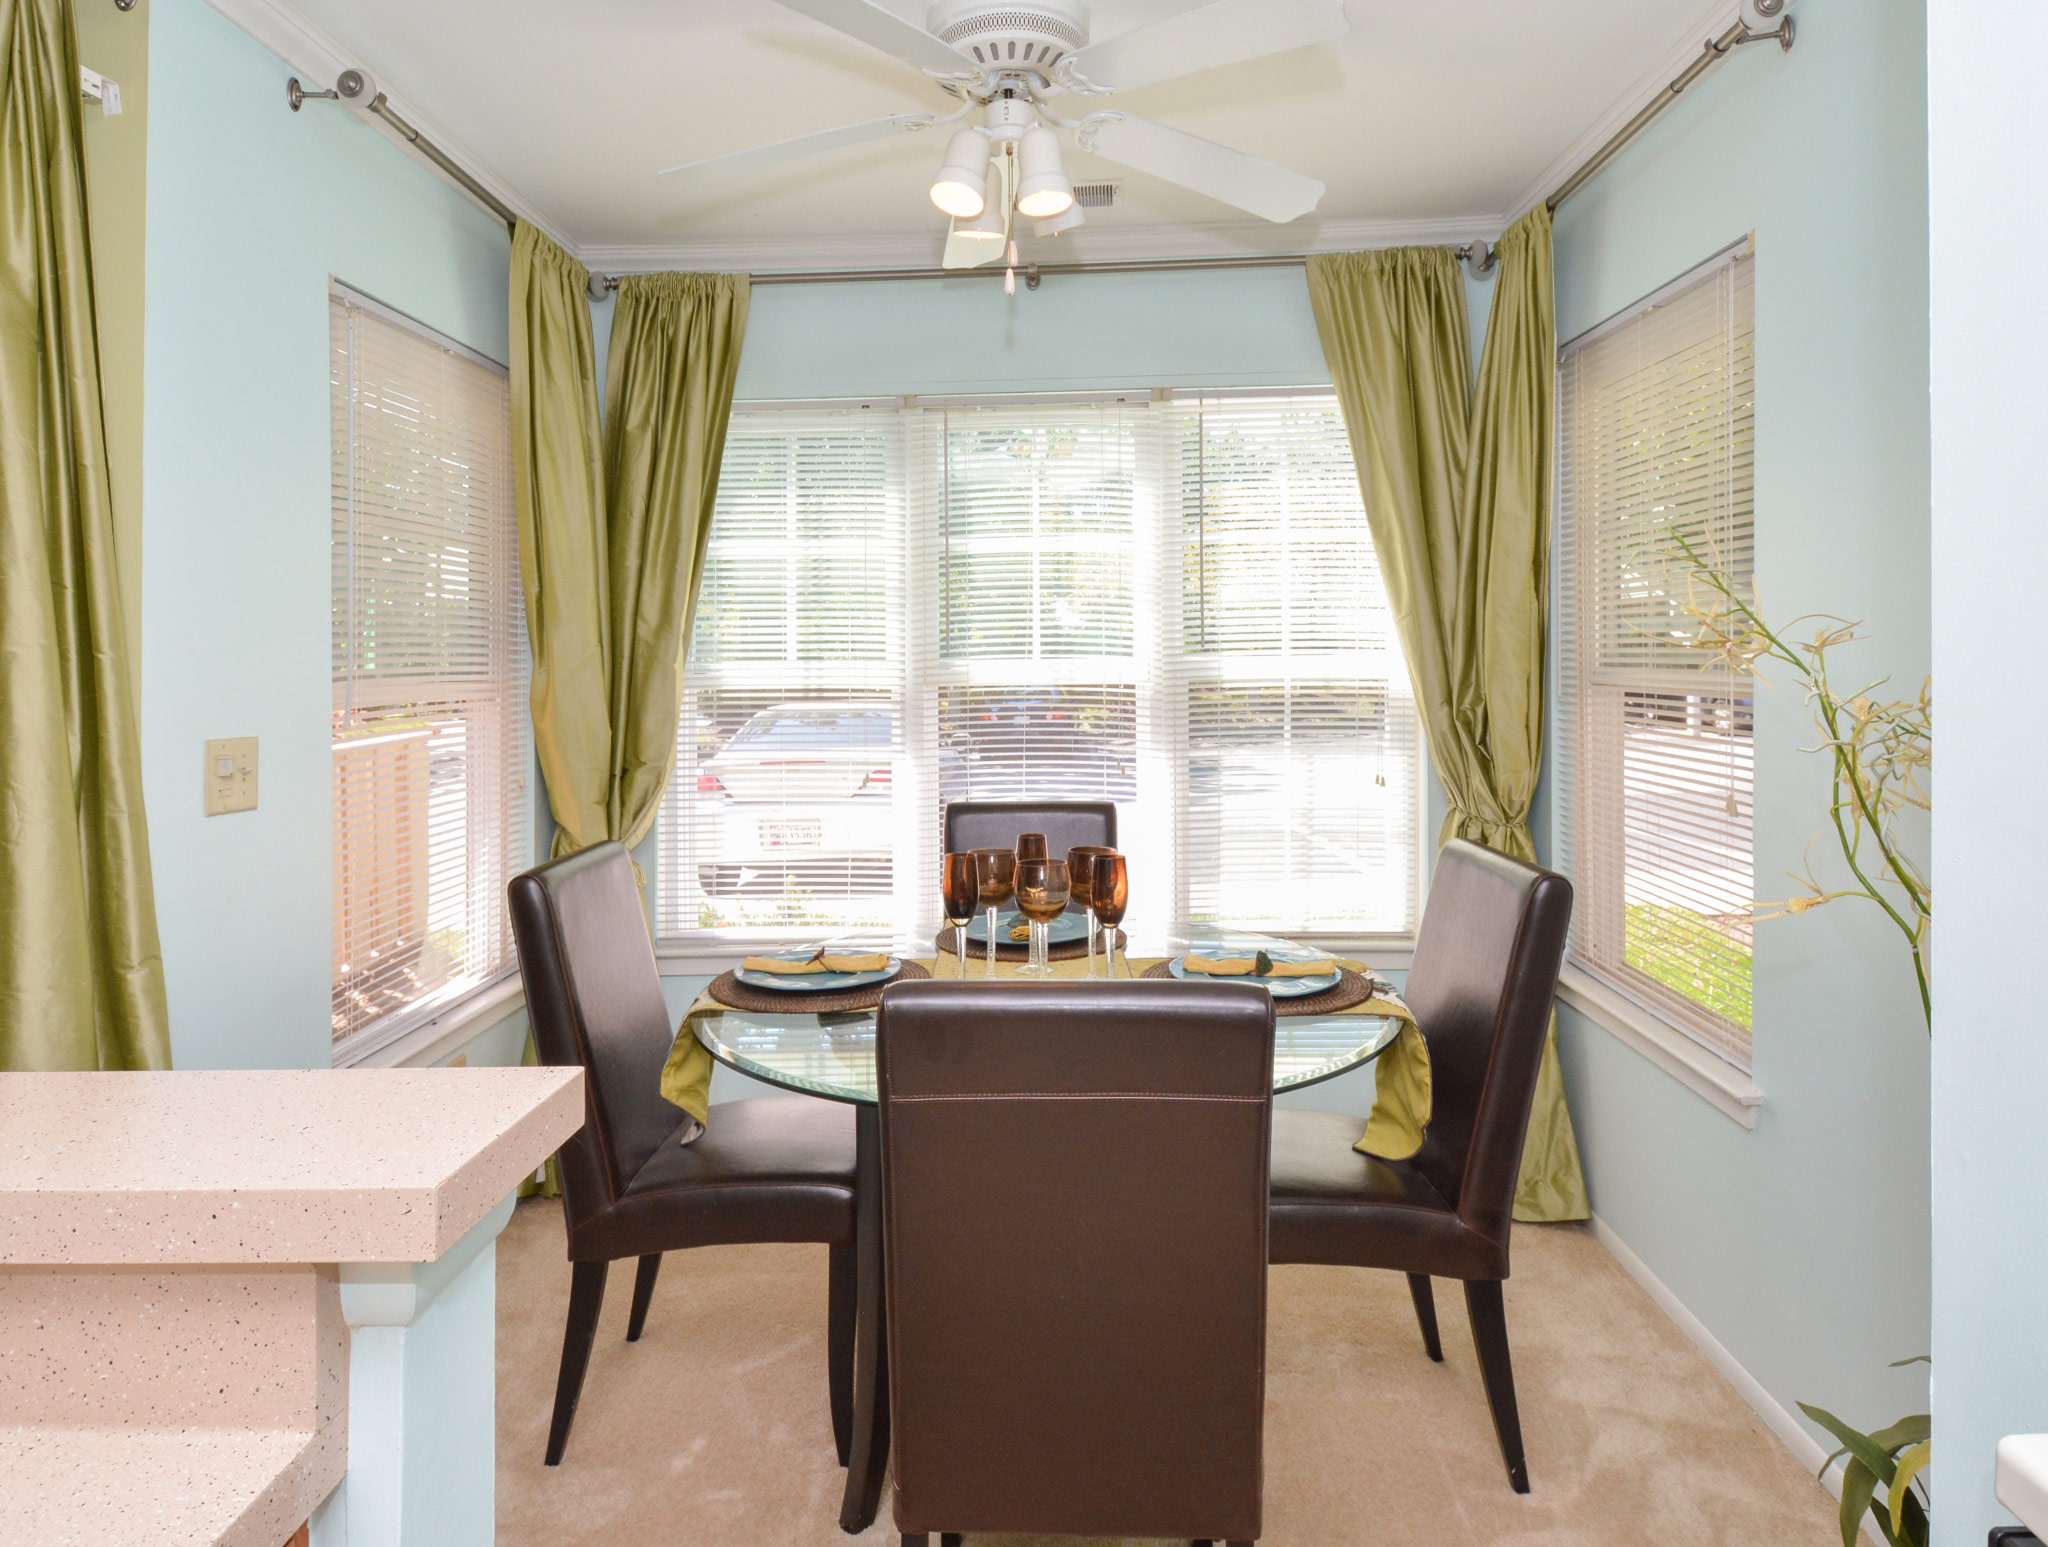 Spring House Apartments dining room with table and chairs